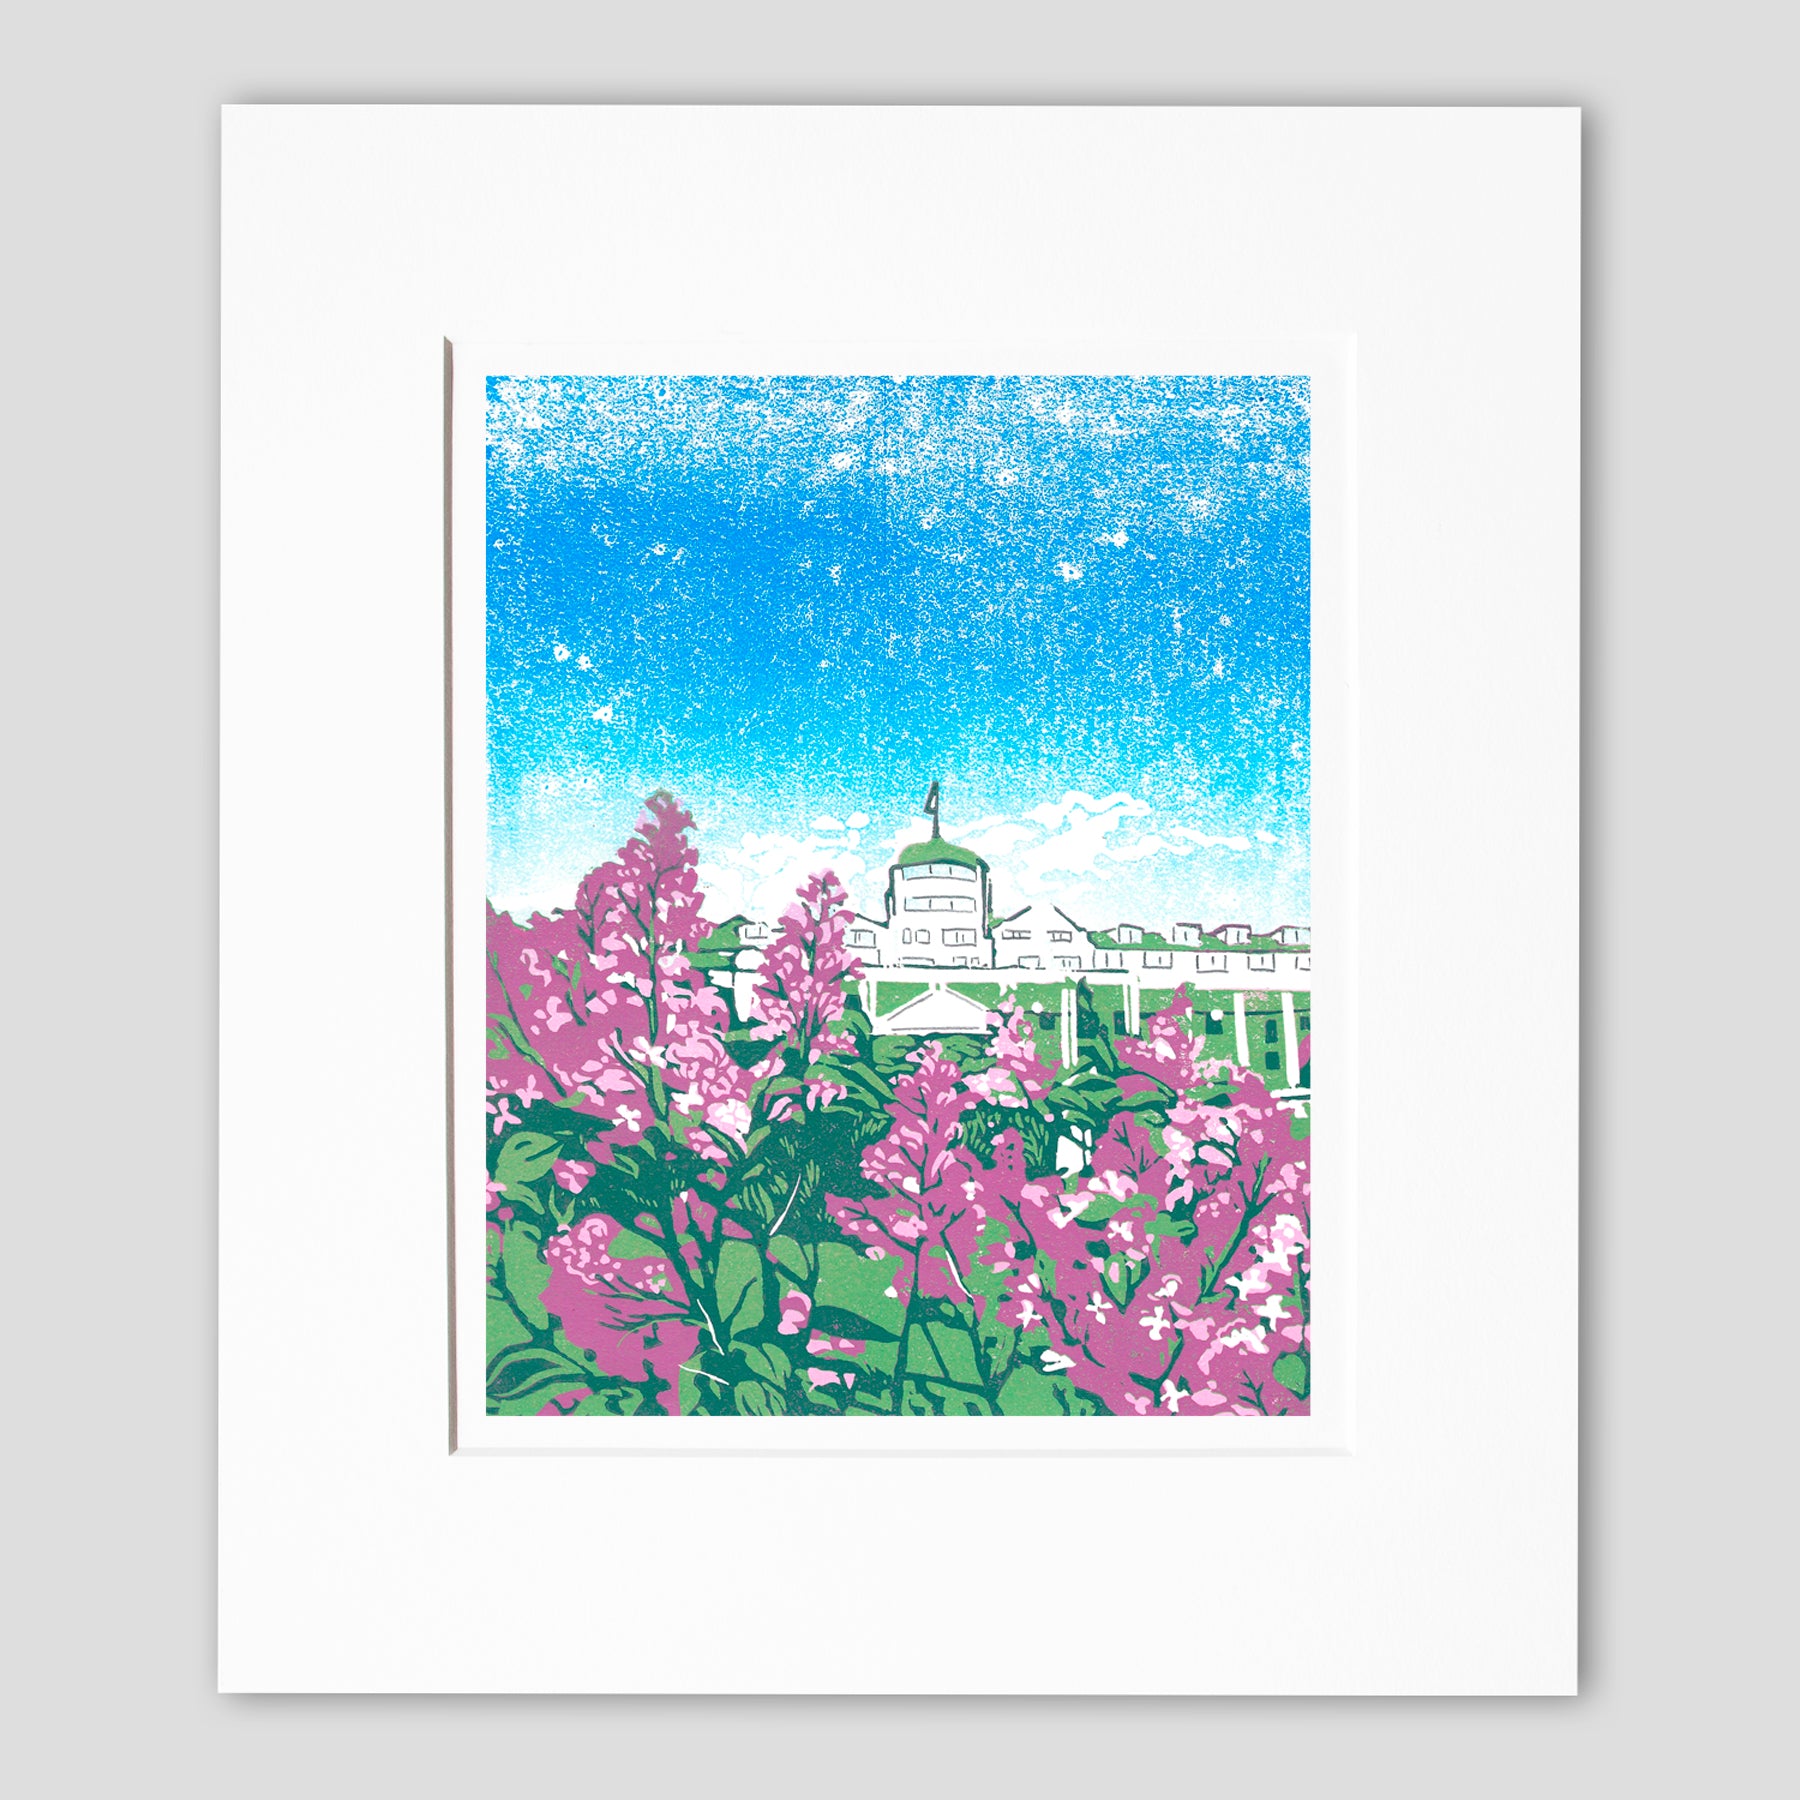 June at the Grand is a multi-color linoleum block print inspired by lovely lilacs blooming in the Tea Garden of the Grand Hotel. 